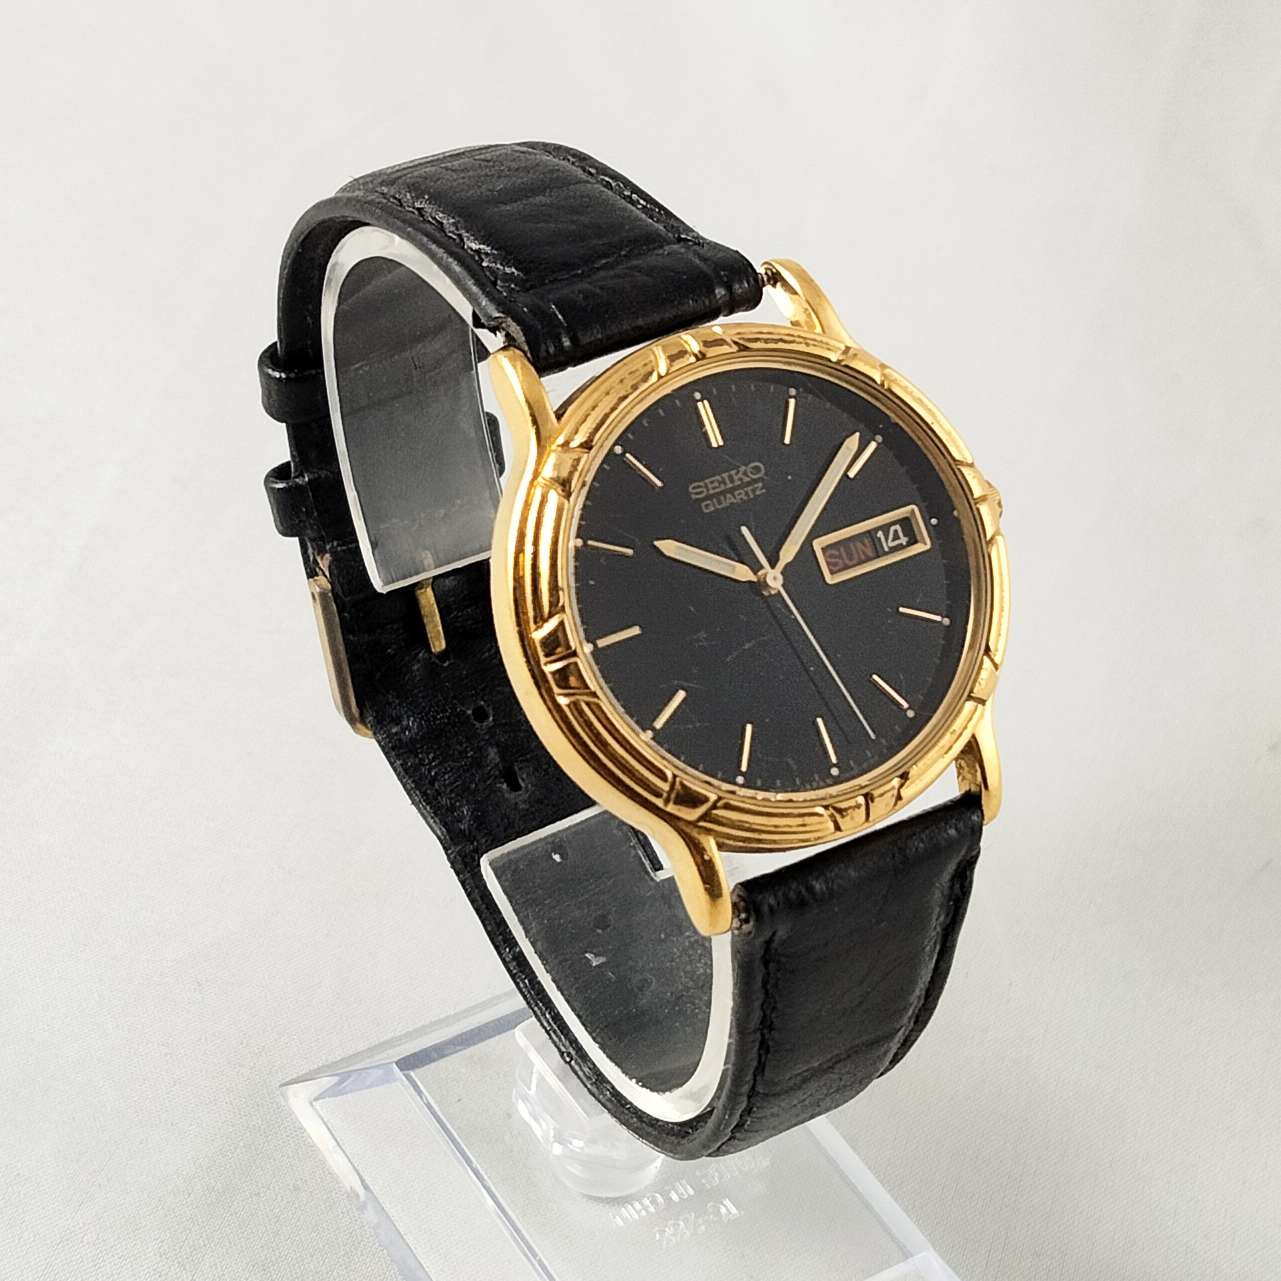 Seiko Oversized Watch, Gold Tone Details, Black Leather Strap